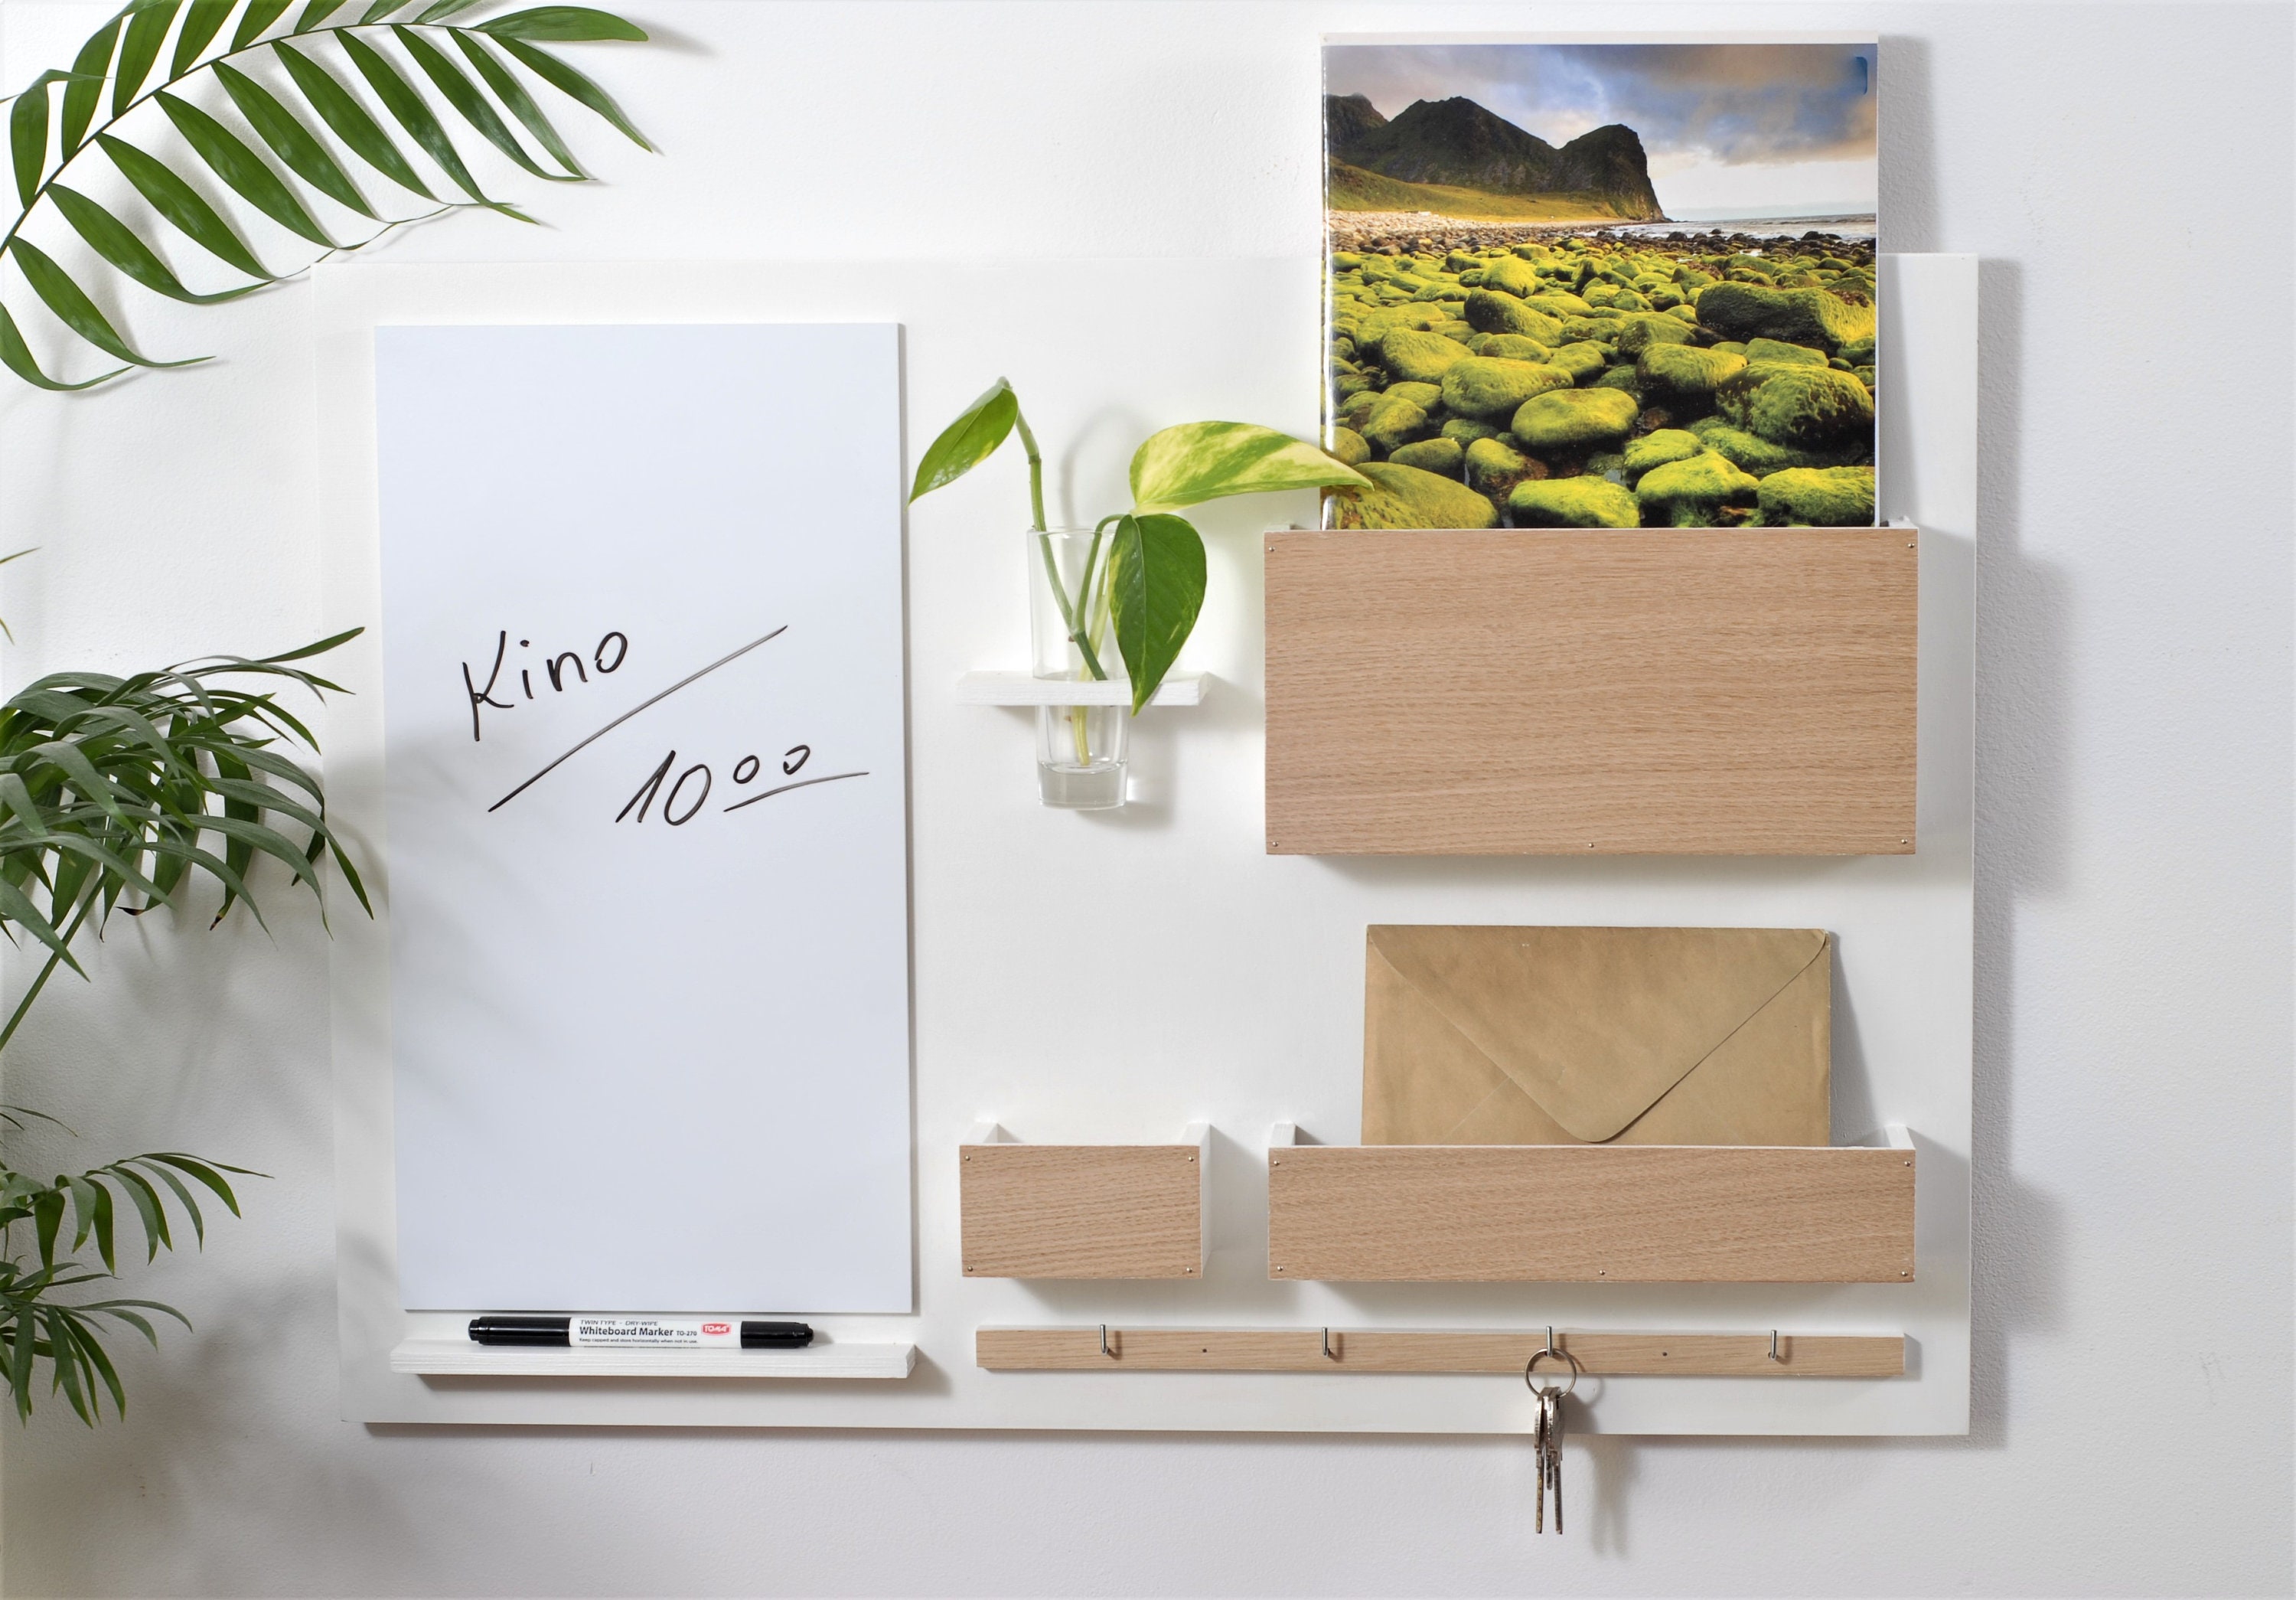 Large Plain Whiteboard for Wall Organizers - 1THRIVE